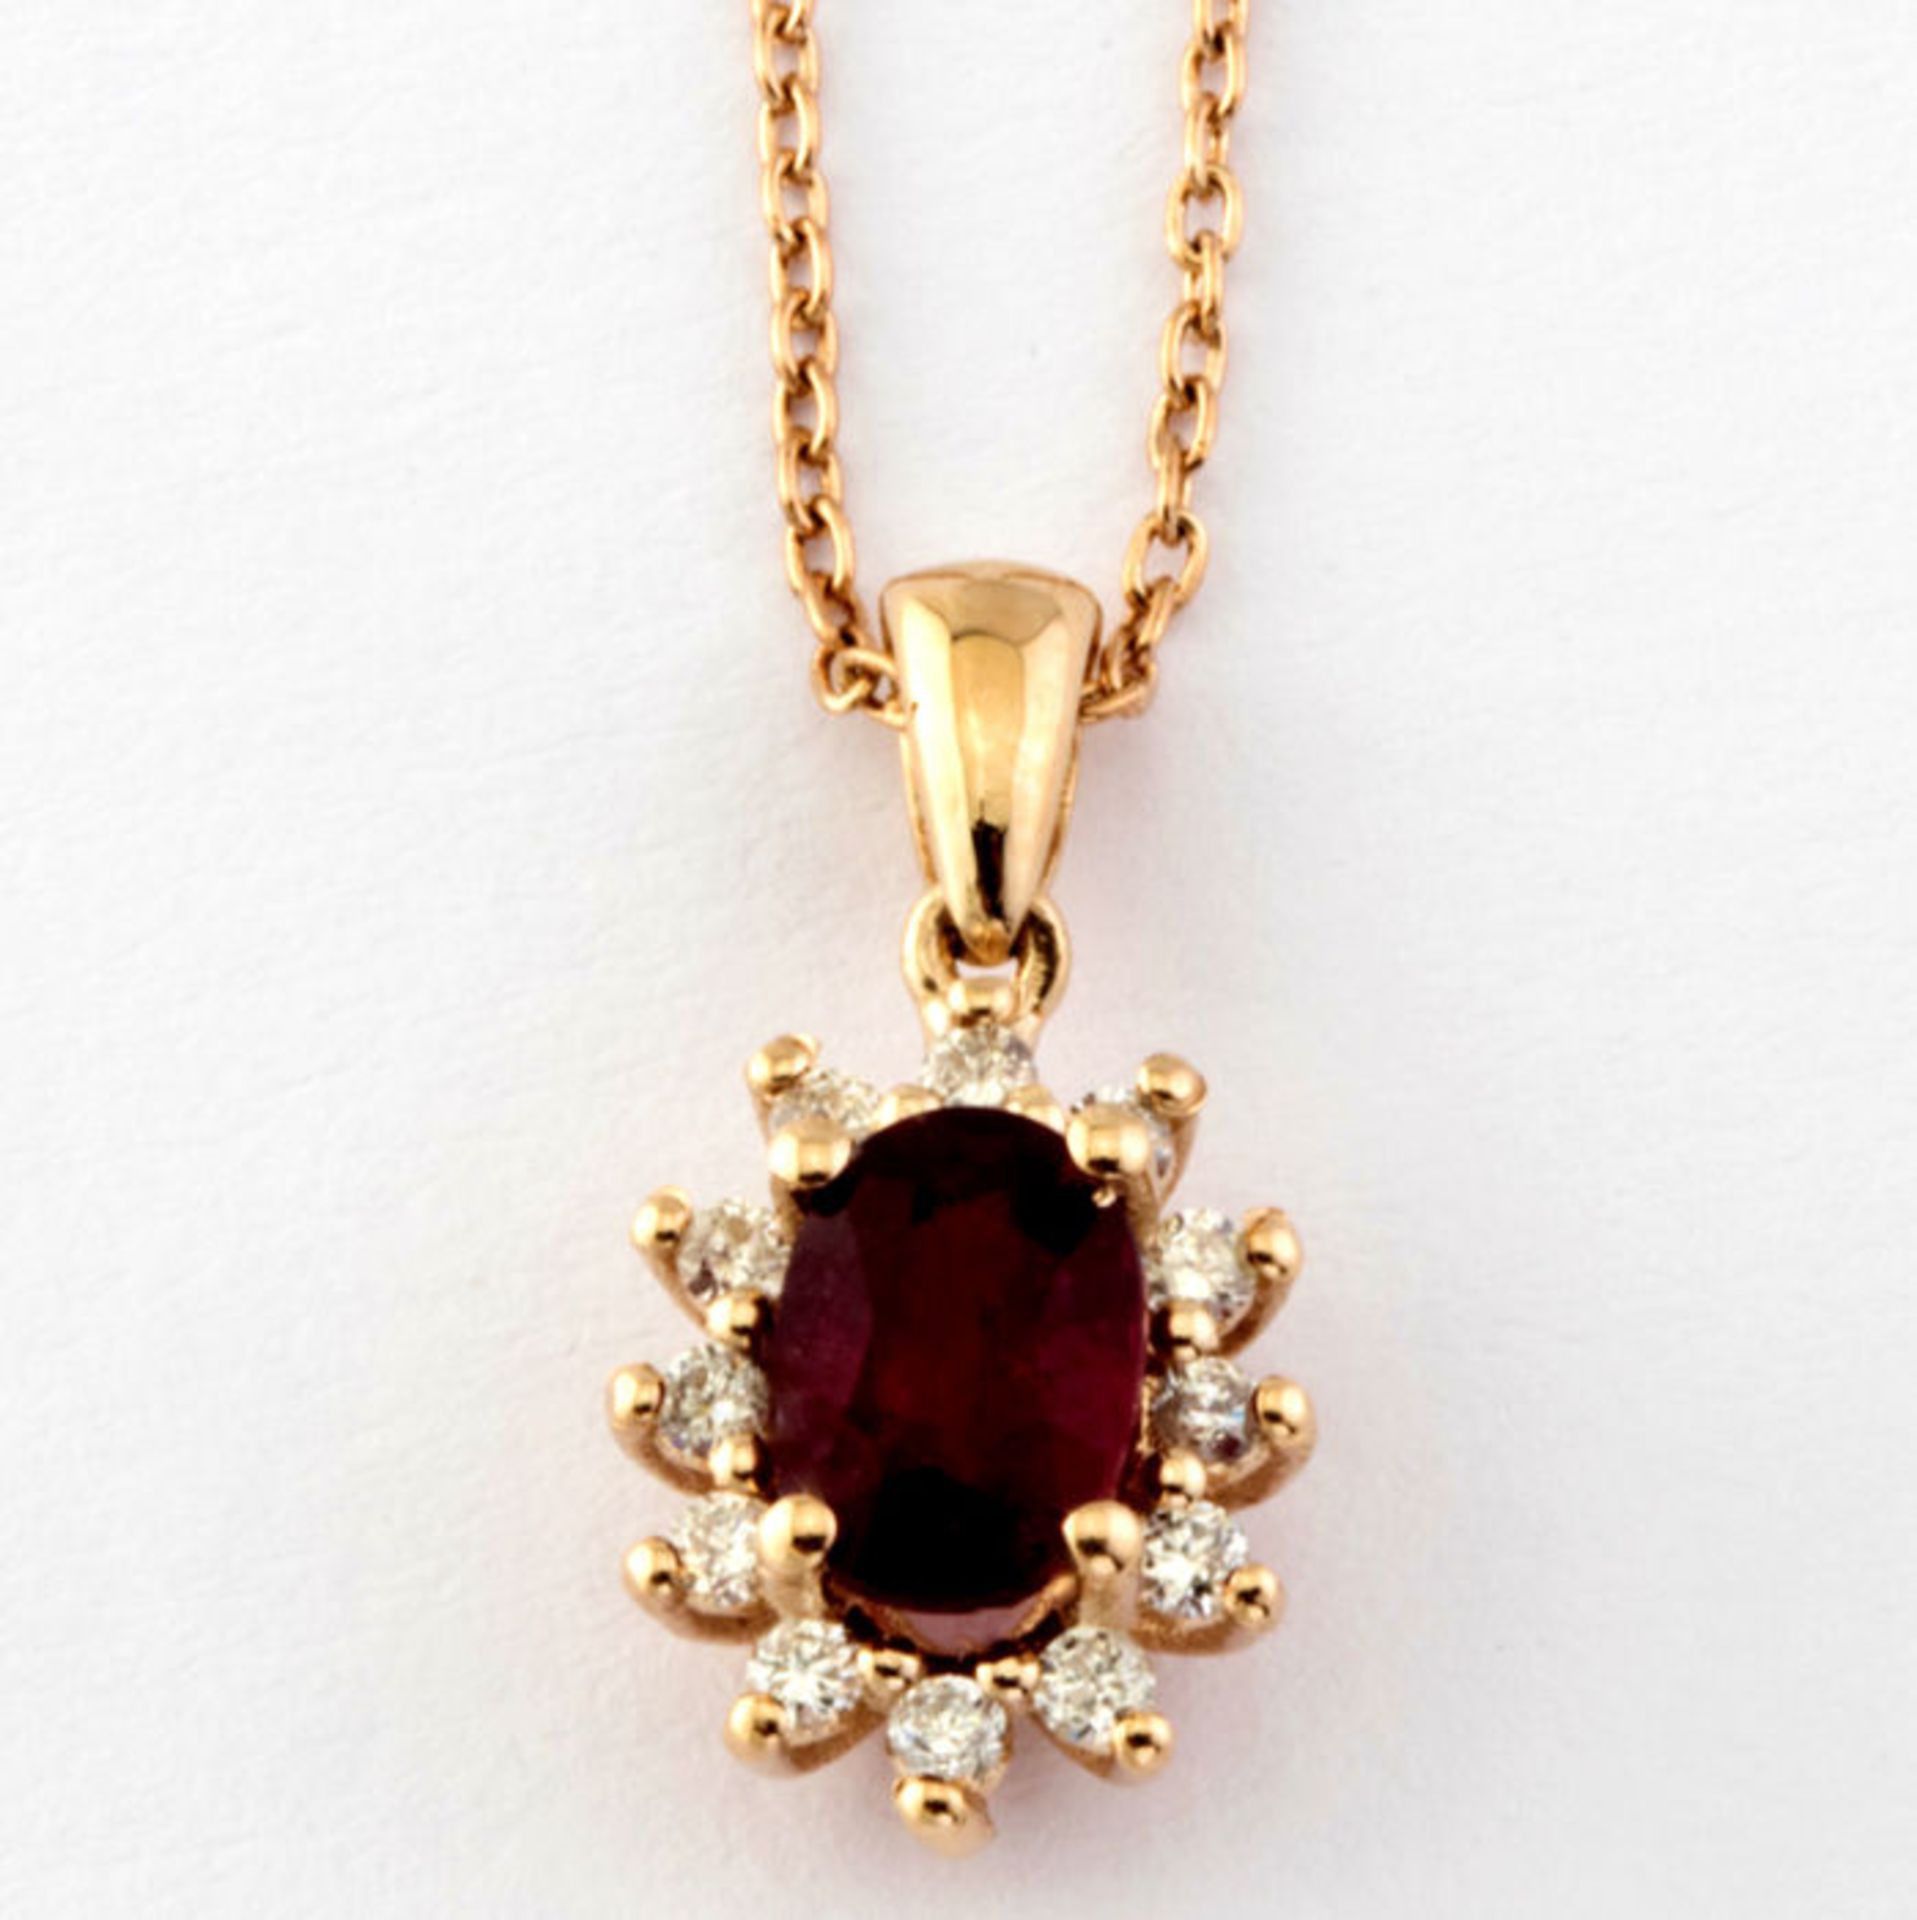 14K Pink Gold Cluster Pendant set with a natural ruby and 12 brilliant cut diamond 0,65ct in total - Image 4 of 5